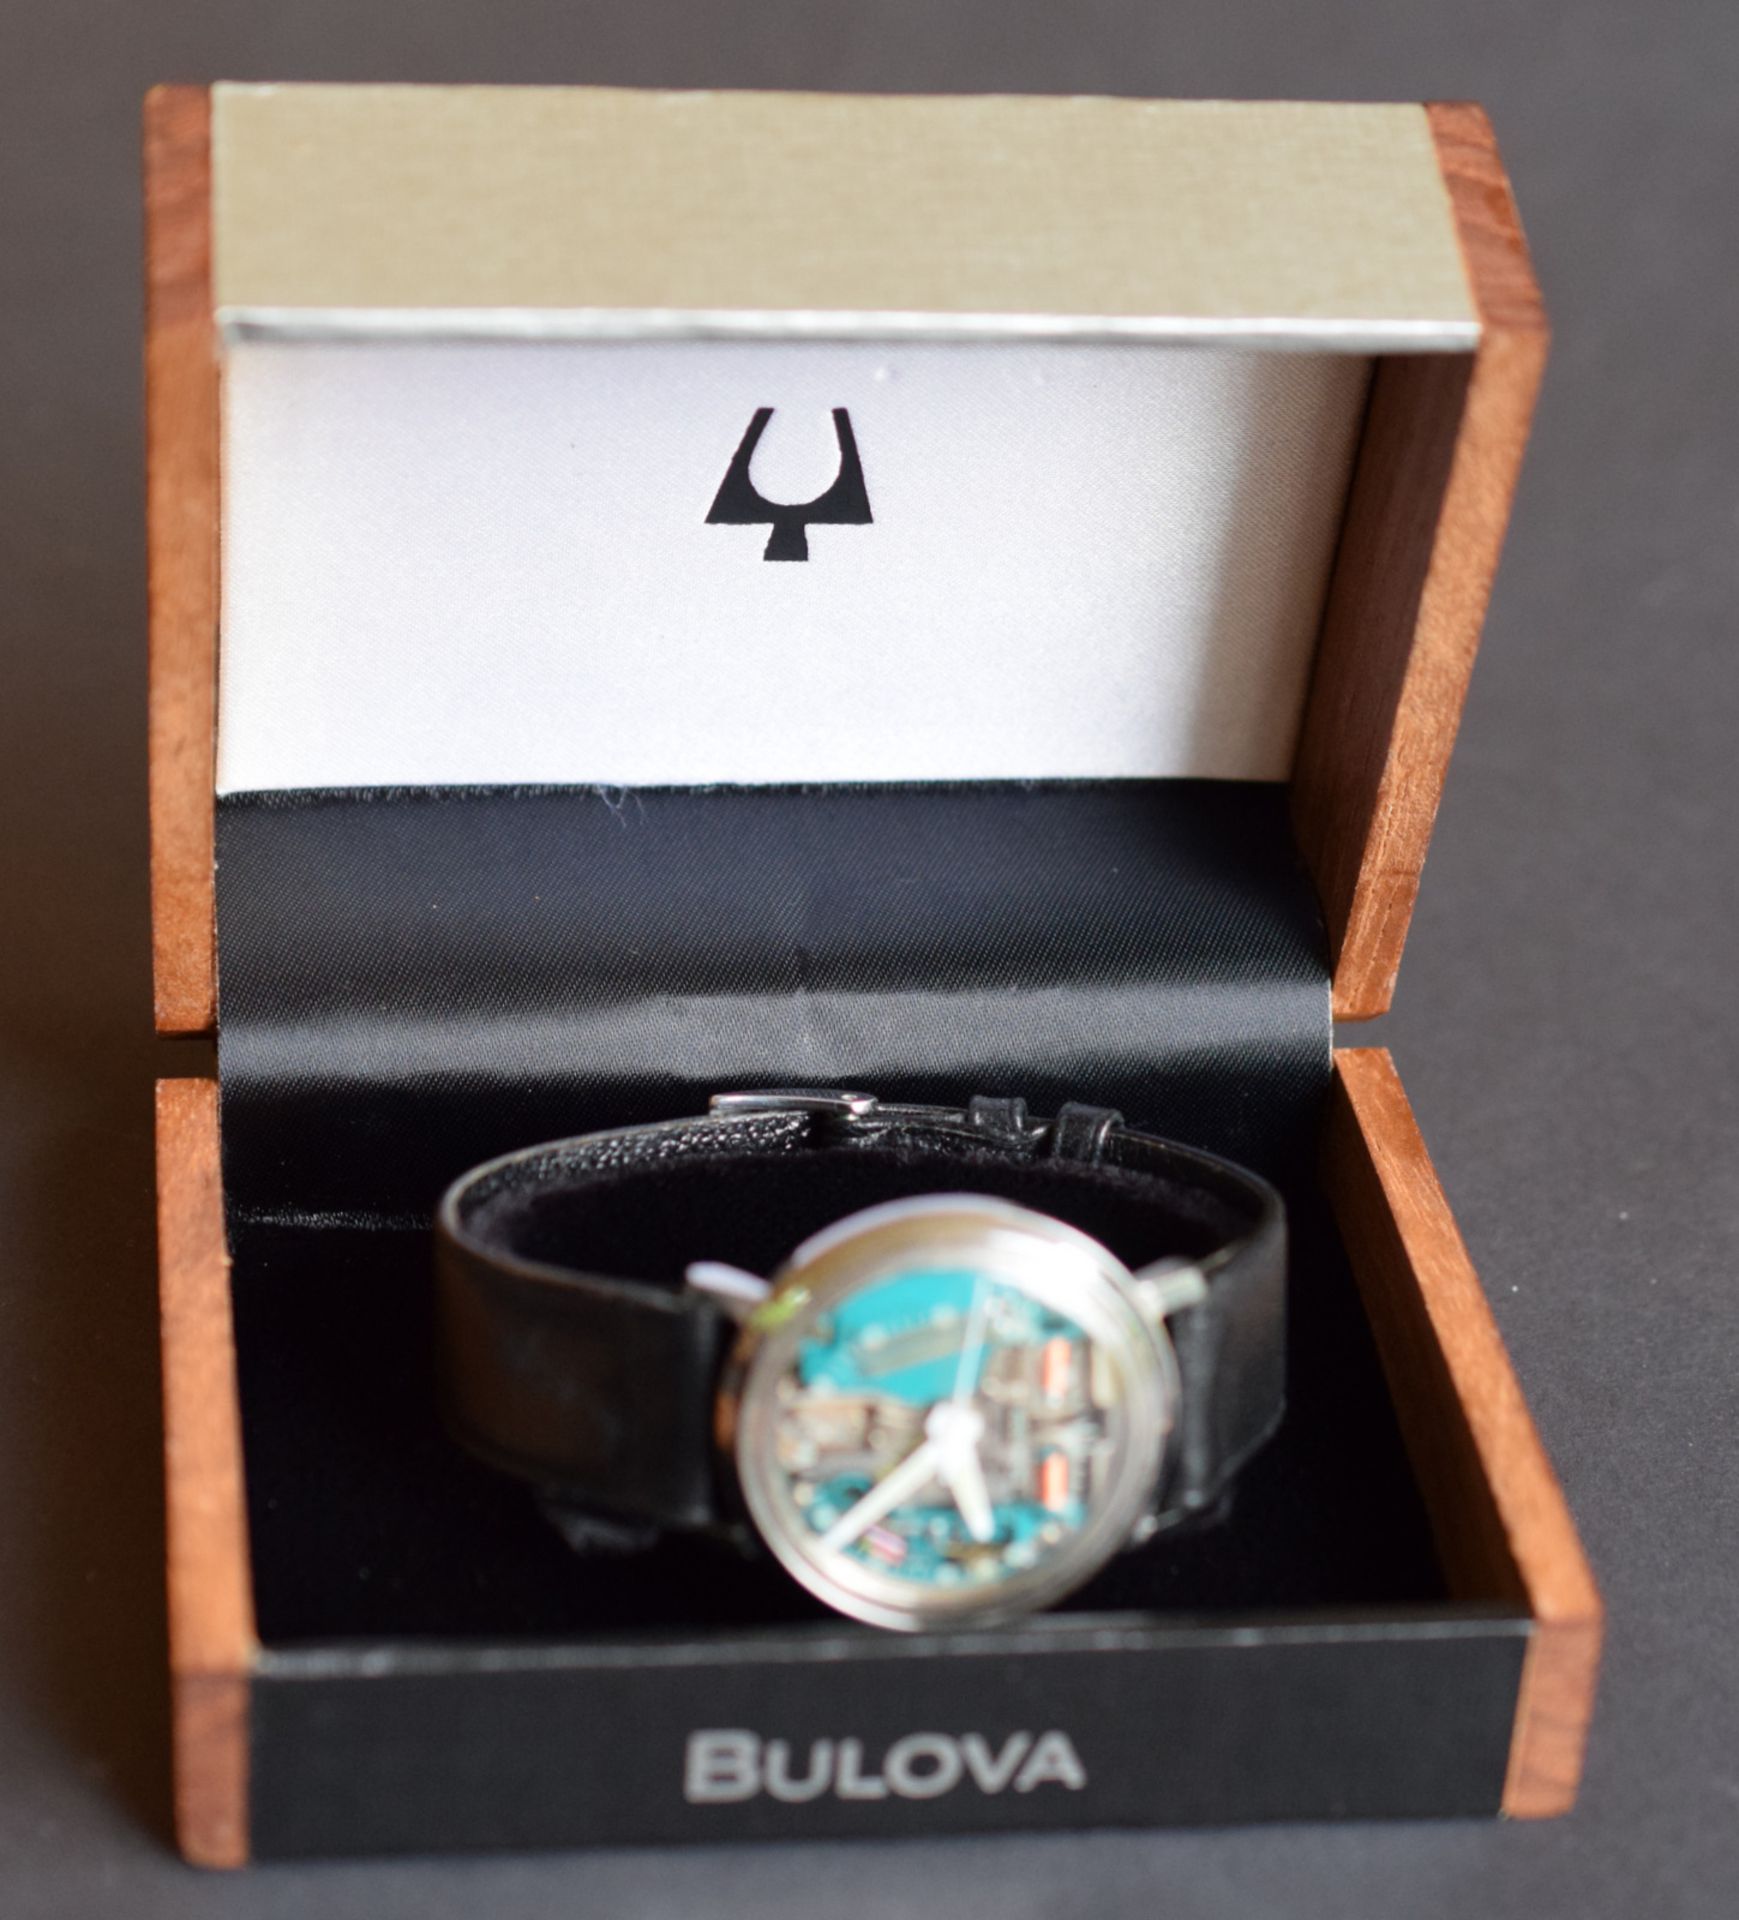 Bulova Accutron Spaceview With Box - Image 6 of 11